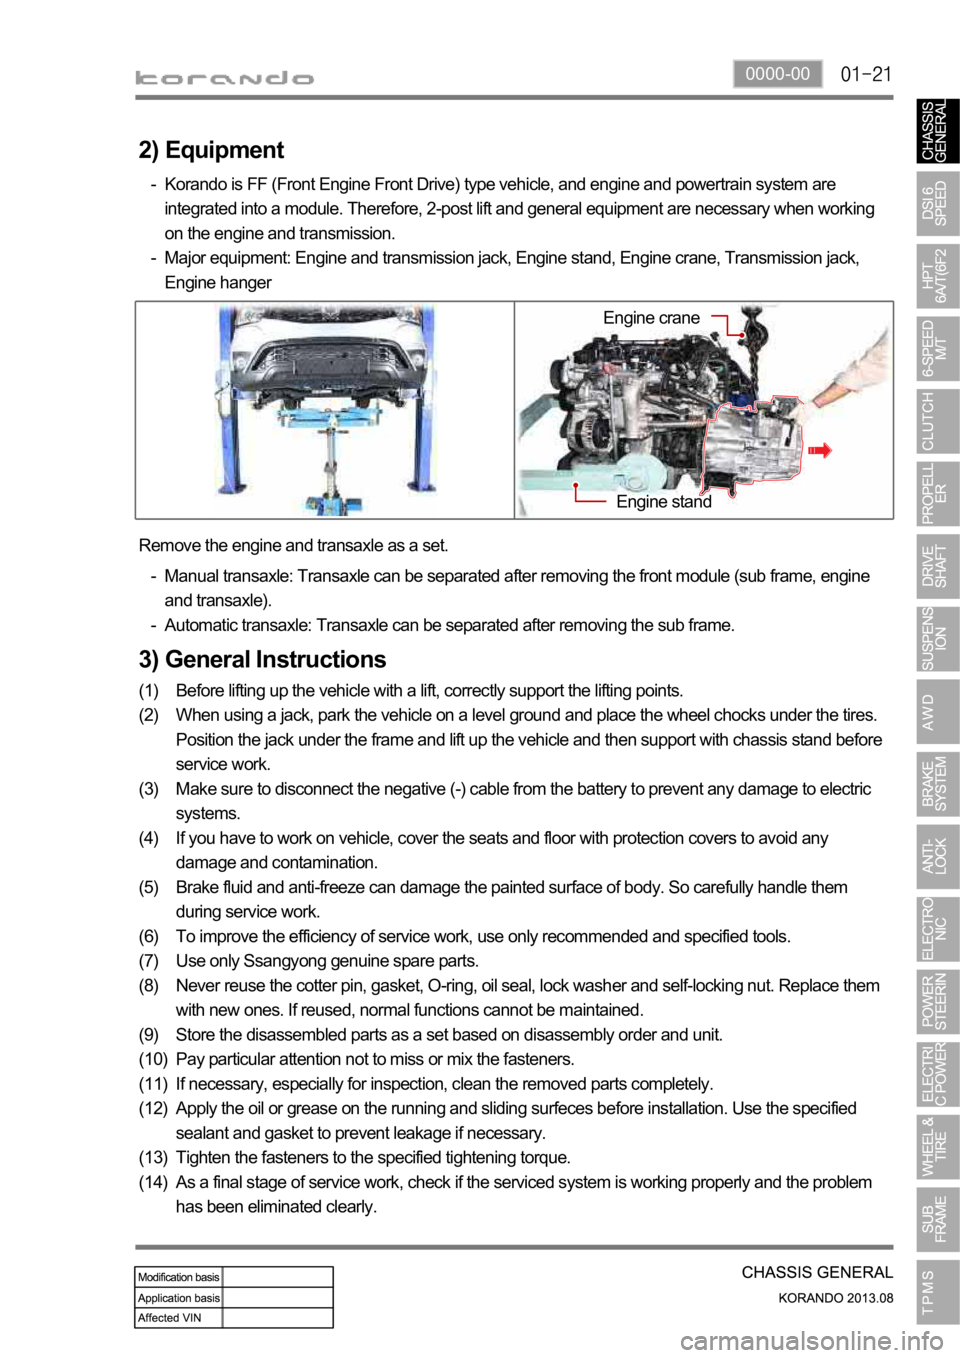 SSANGYONG KORANDO 2013  Service Manual 0000-00
3) General Instructions
Before lifting up the vehicle with a lift, correctly support the lifting points.
When using a jack, park the vehicle on a level ground and place the wheel chocks under 